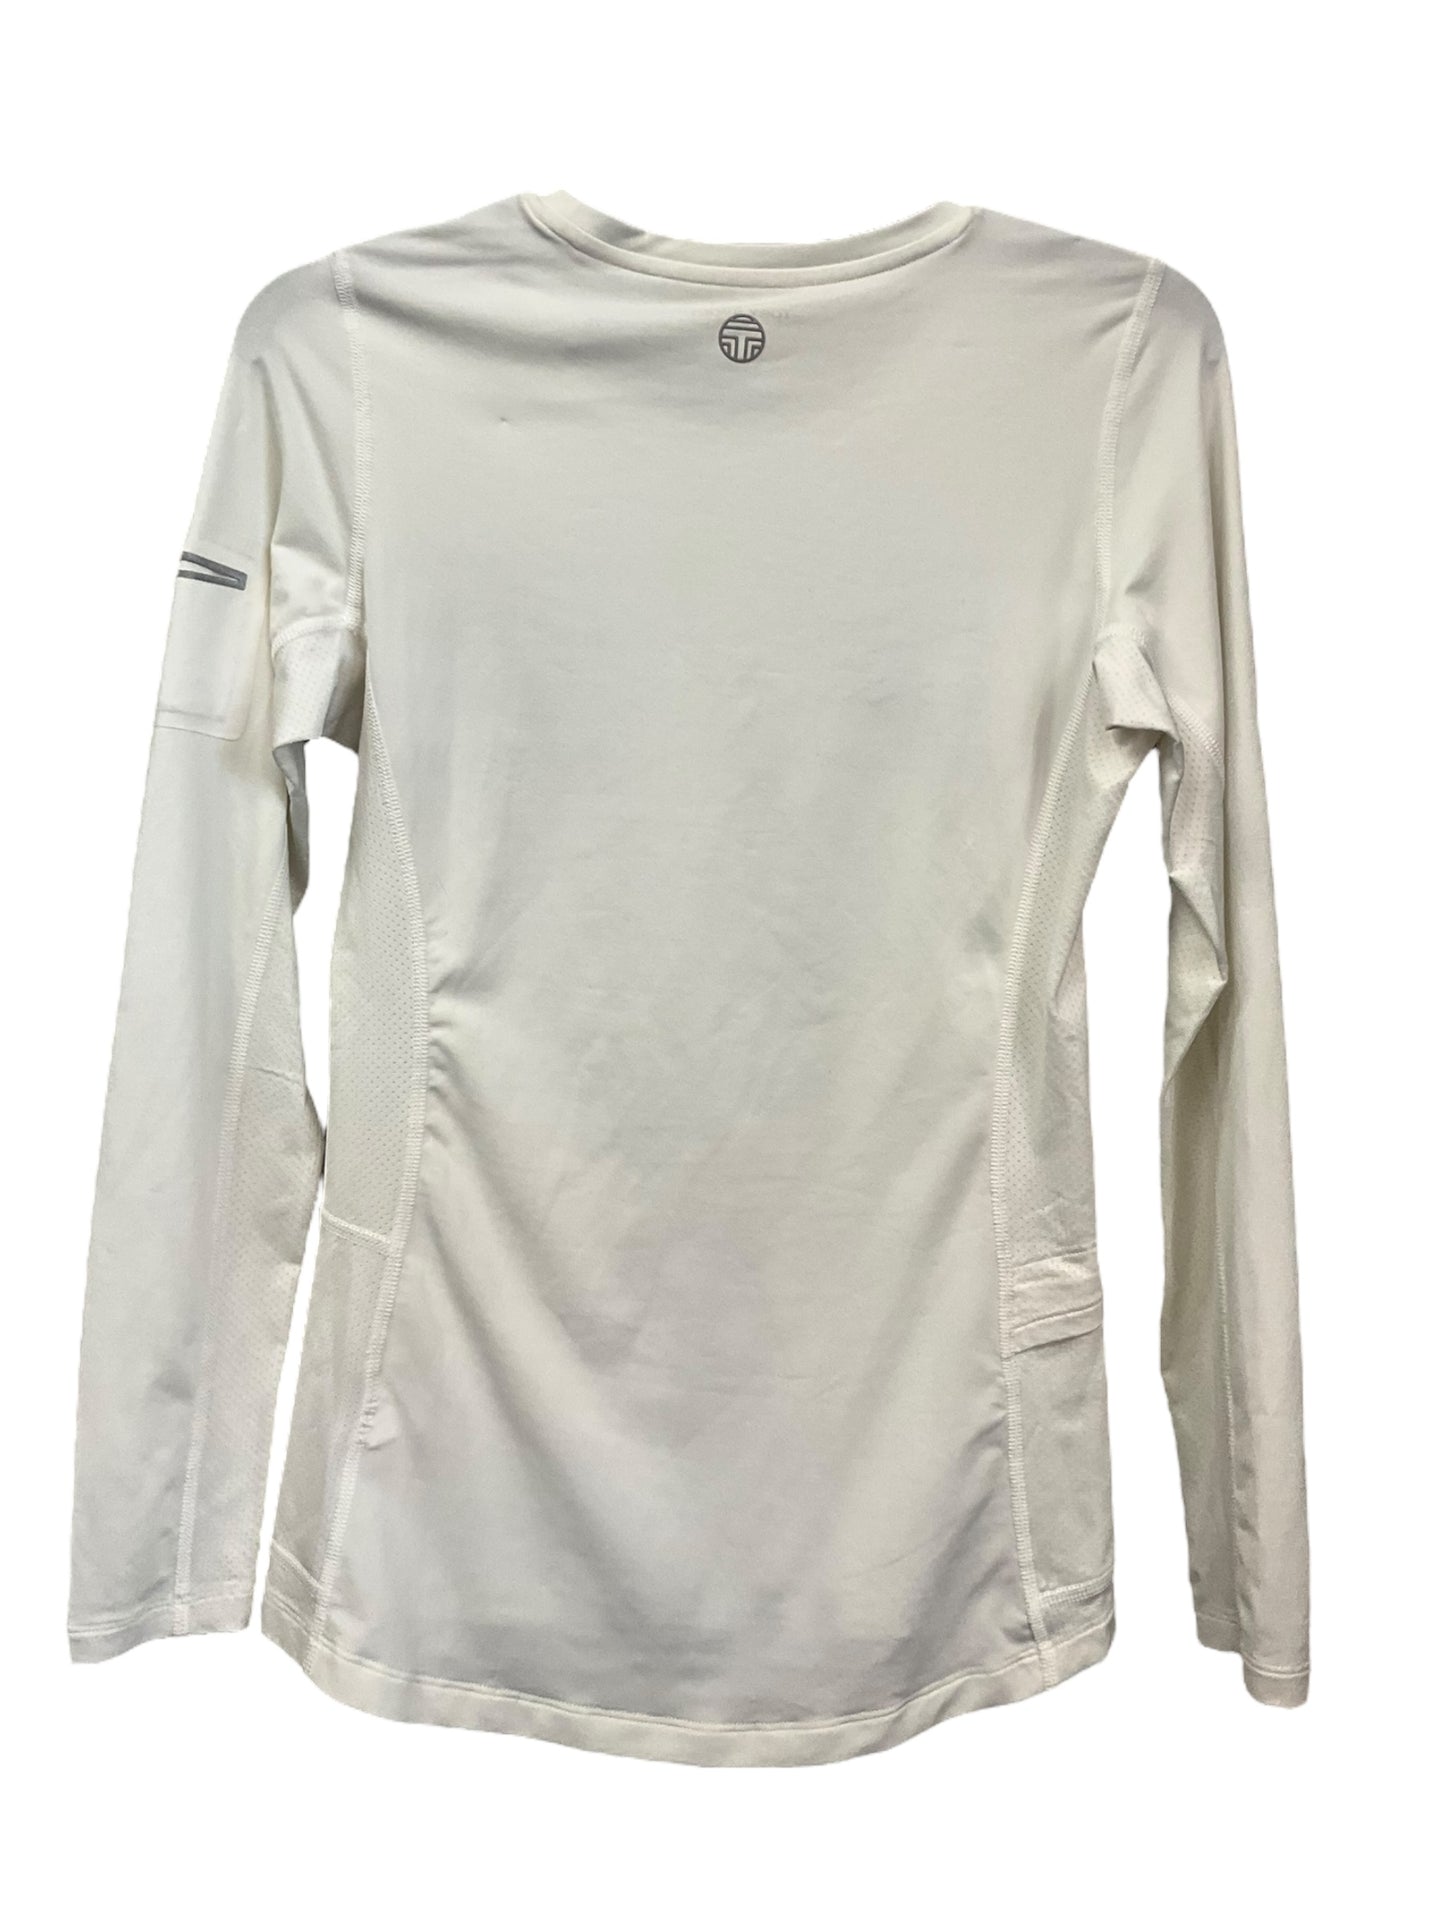 Athletic Top Long Sleeve Crewneck By Tory Burch  Size: Xs